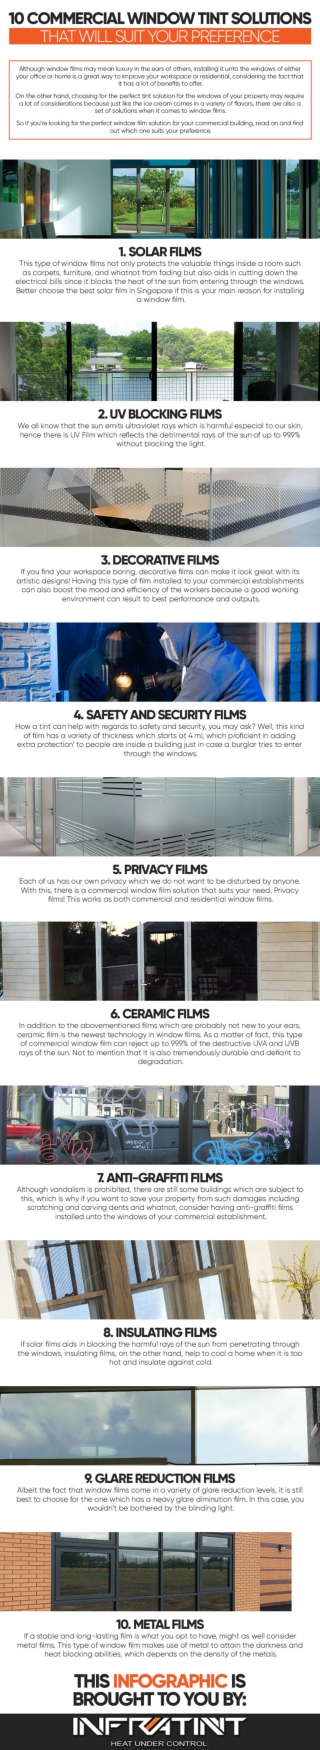 10 commercial window tint solutions that will suit your preference